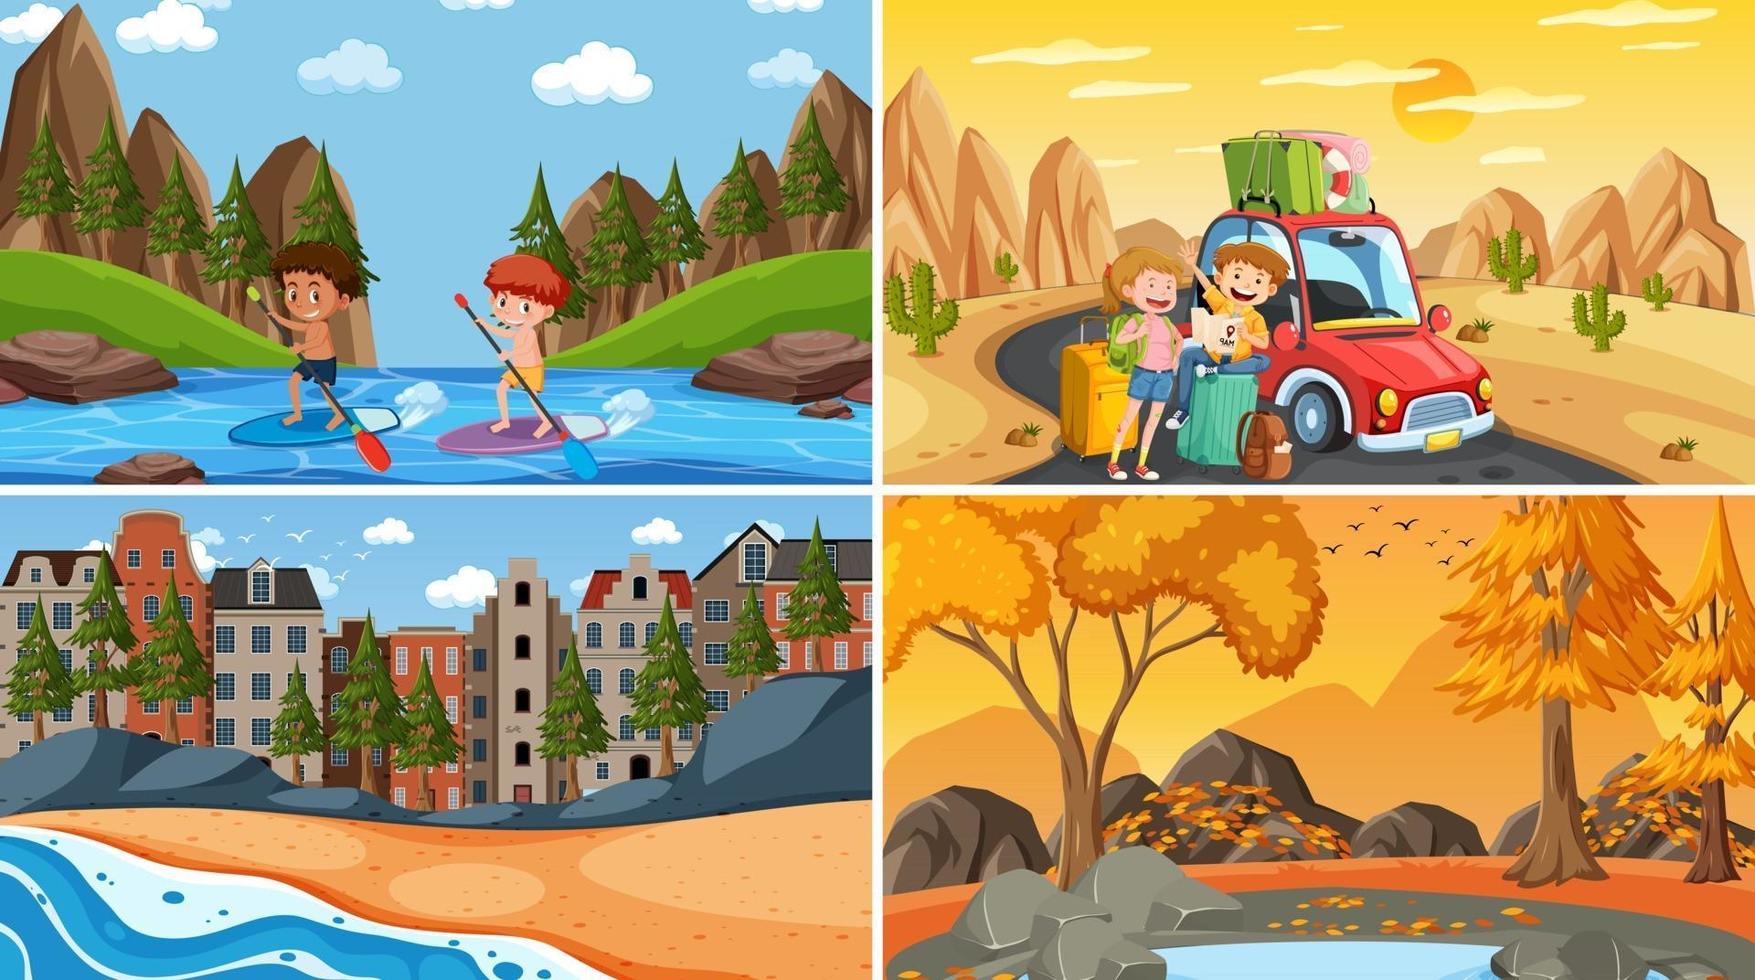 Set of different nature scenes cartoon style vector